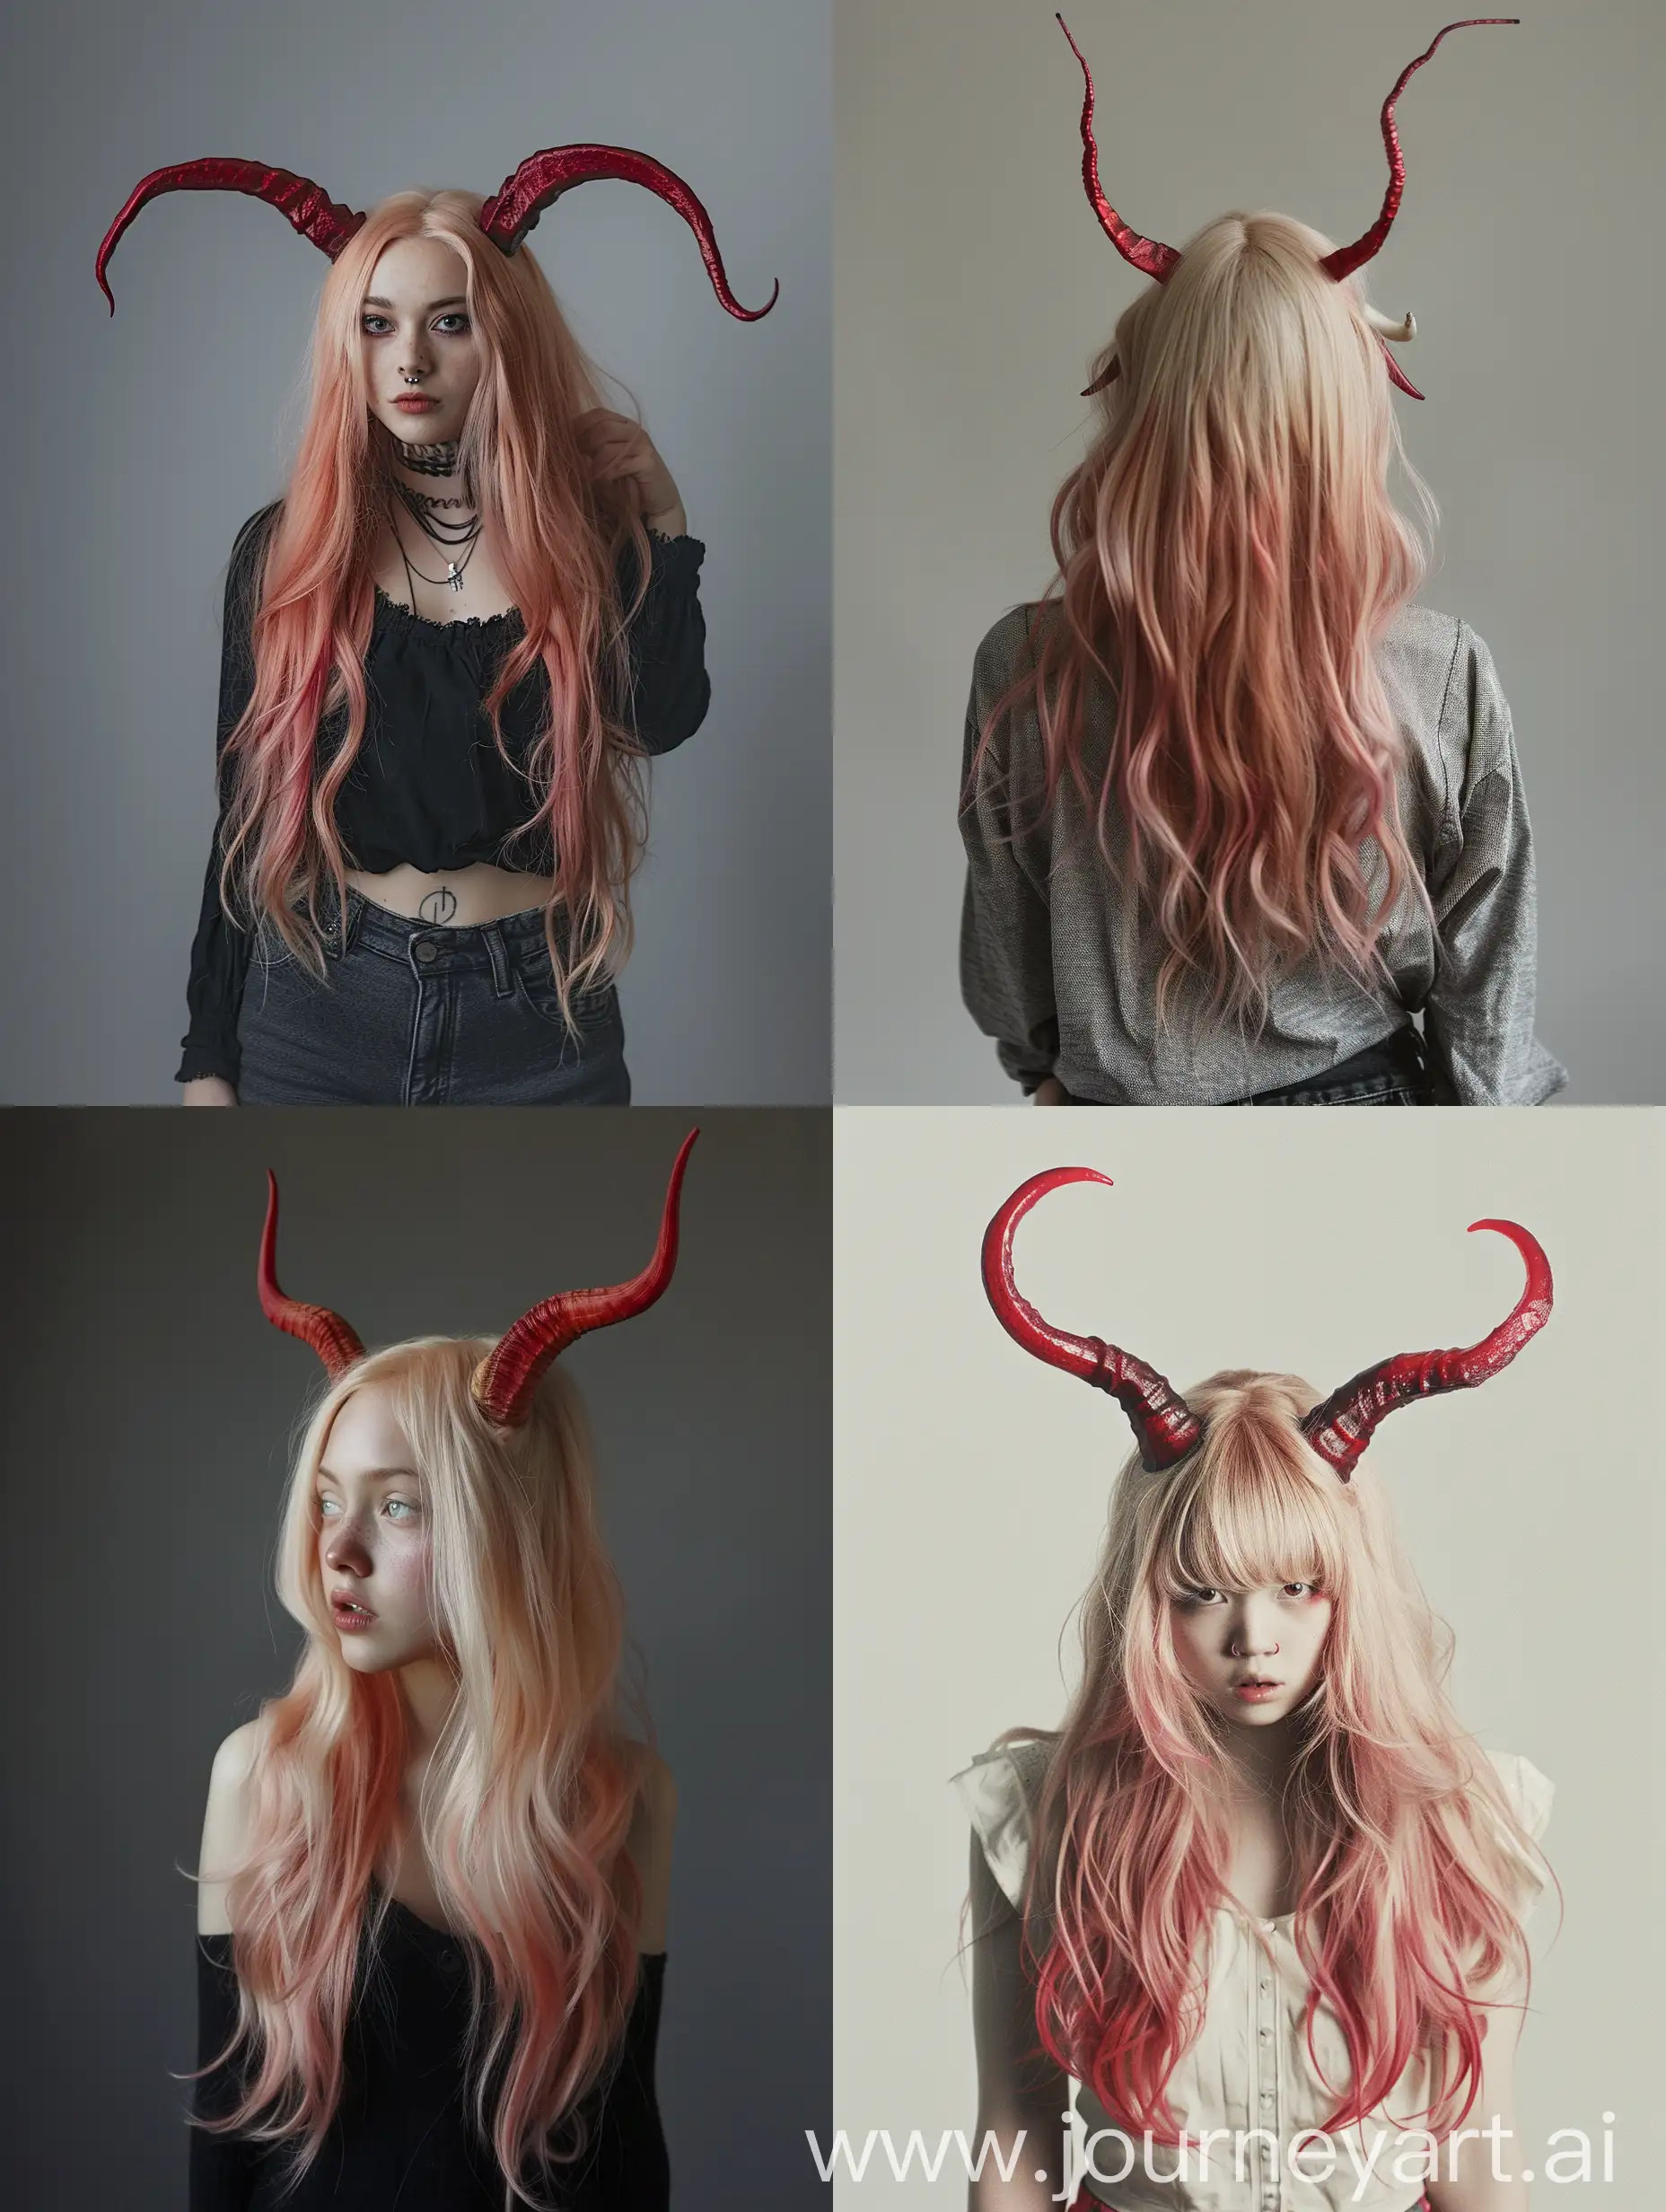 Woman with long blonde pinkish hair with red horns, photo, waist up, lighting, composition --v 6